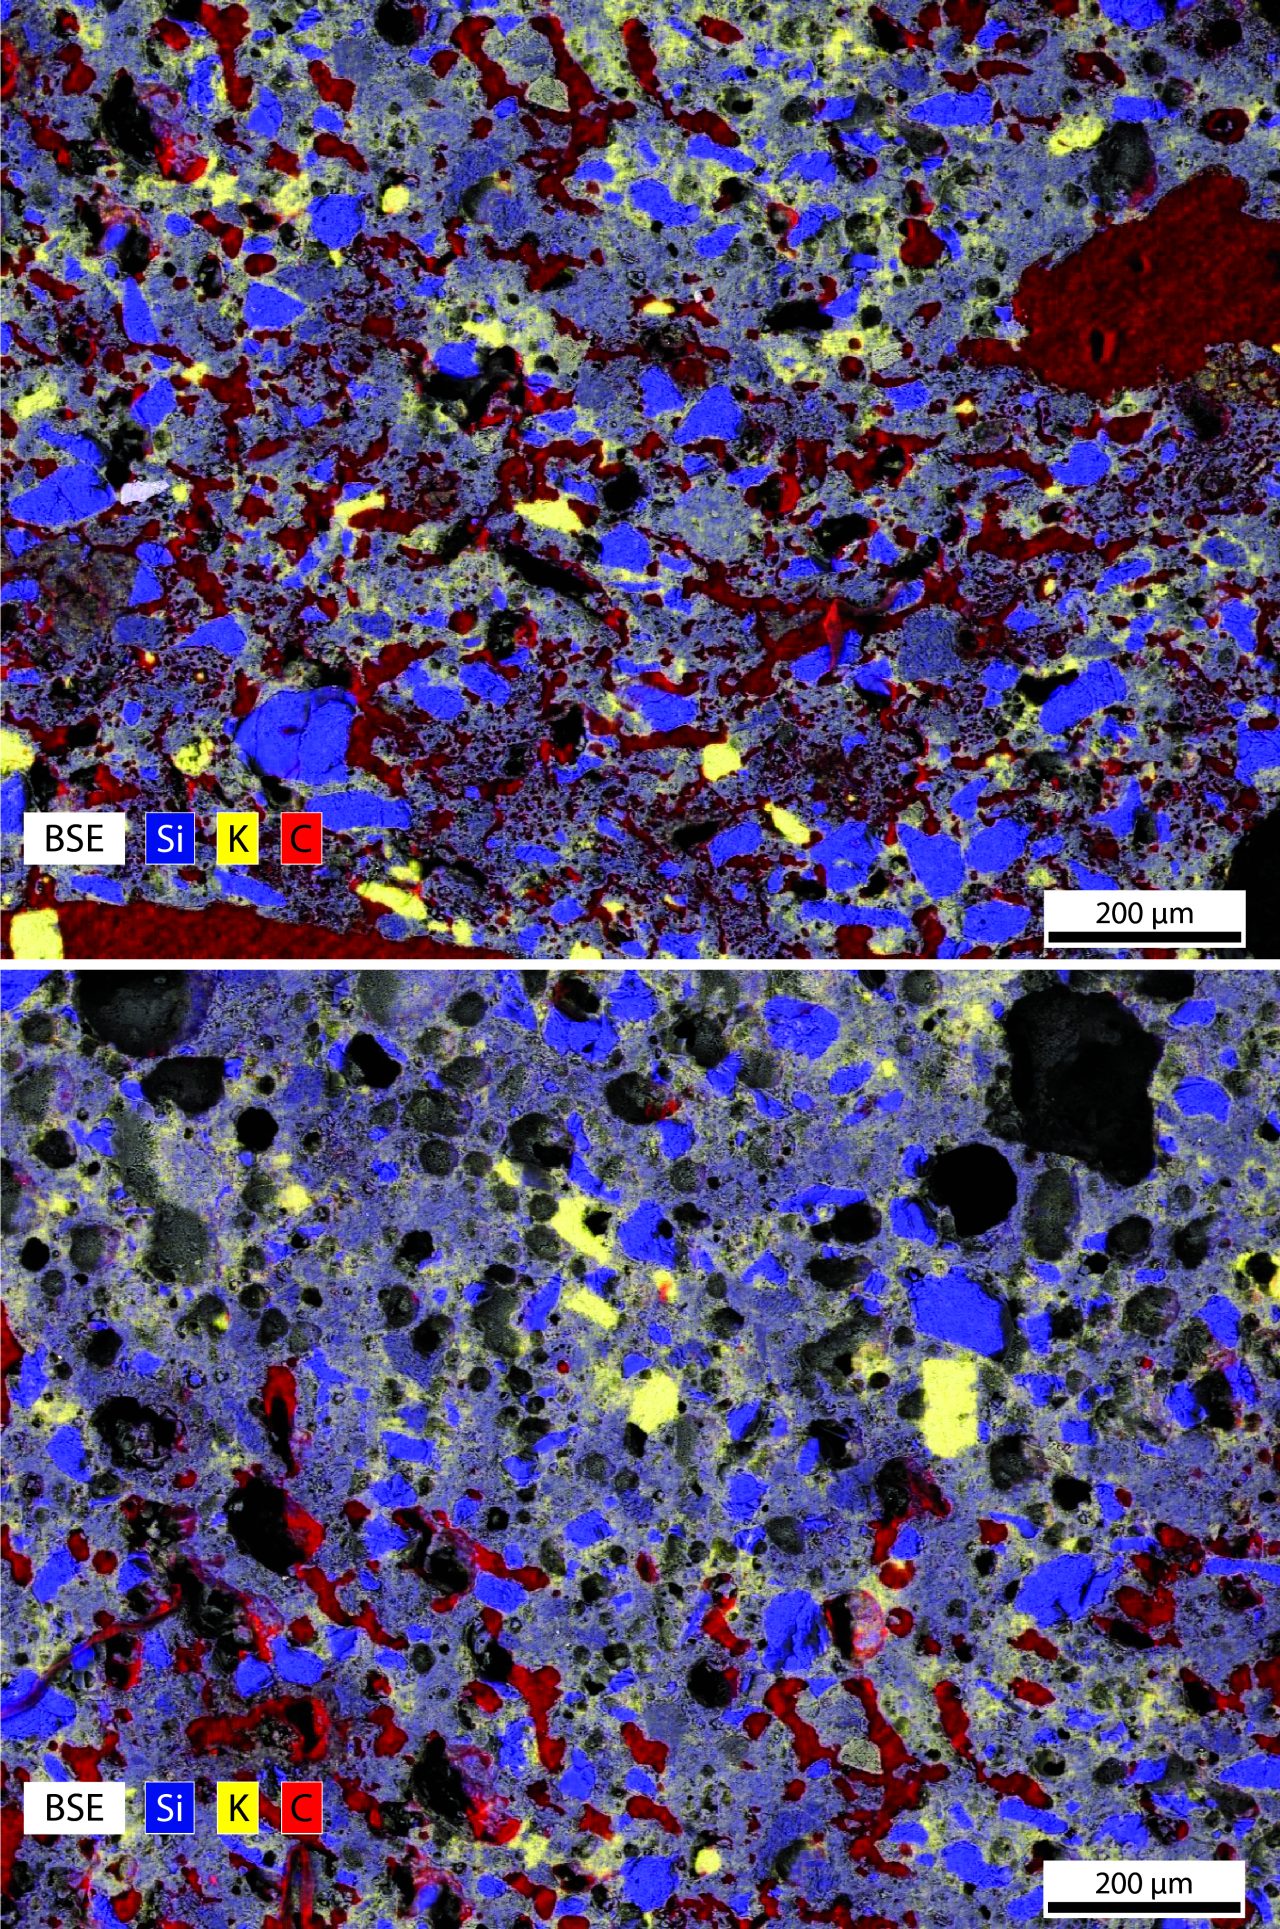 EDS compositional maps overlain on BSE images showing the transition showing the transition from the outer zone of the ceramic vessel through to an intermediate domain closer to the vessel interior. While the mineral types making up the temper (e.g., quartz, K-feldspar) do not change, the abundance of organic material (here mapped as C in red) rapidly decreases and the abundance of bubbles increases.